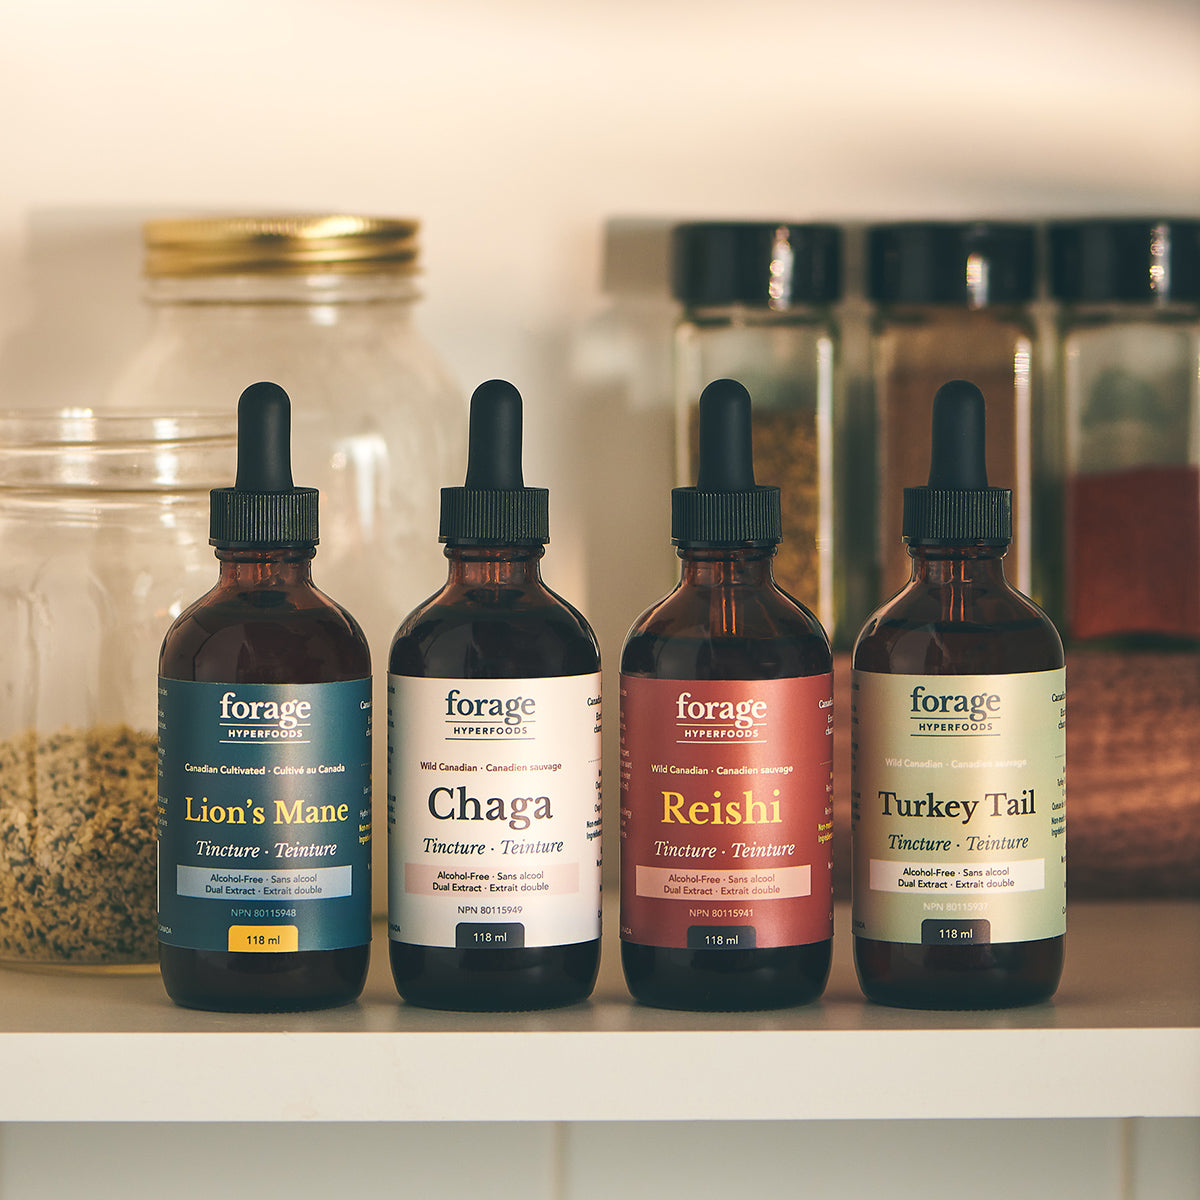 The Forager Set in the Alcohol-Free Format. It includes 4 bottles and tinctures- Chaga, Reishi, Turkey Tail and Lion’s Mane. They’re in a 118 ml format.  They are positioned in an everyday cabinet, with various spices in the background.